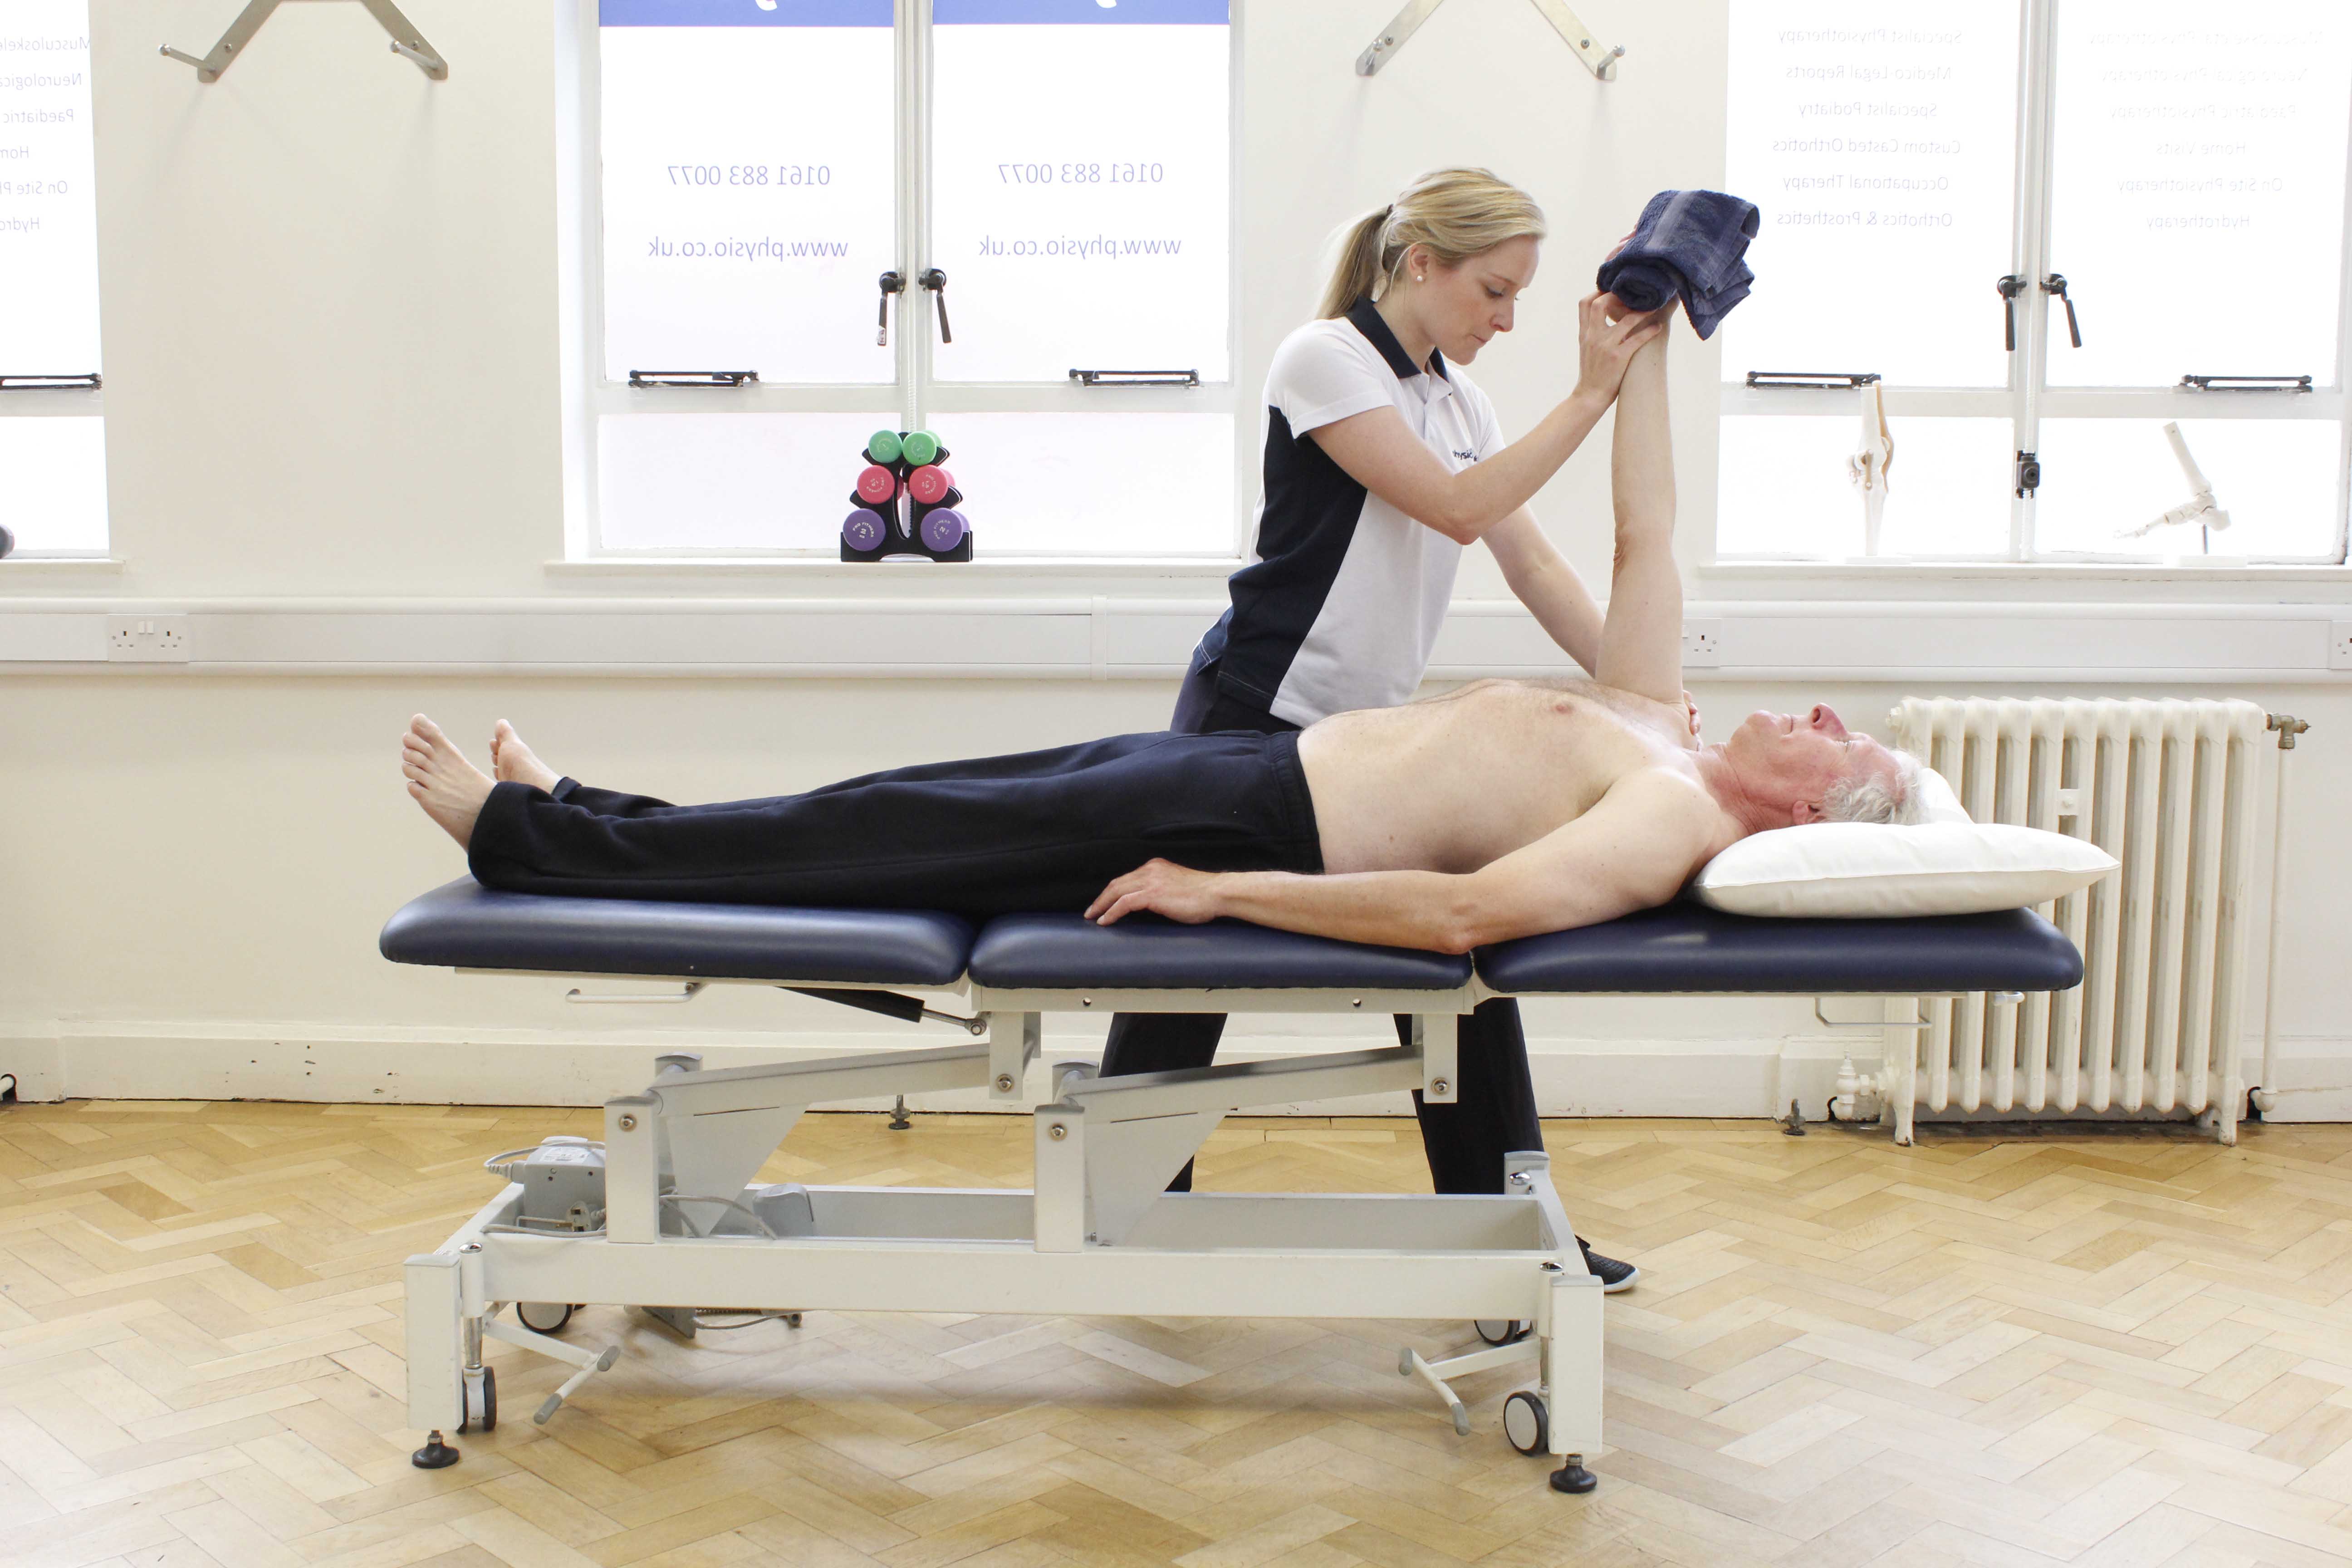 Upper limb mobilisation and stretches performed by a specialist neurological physiotherapist